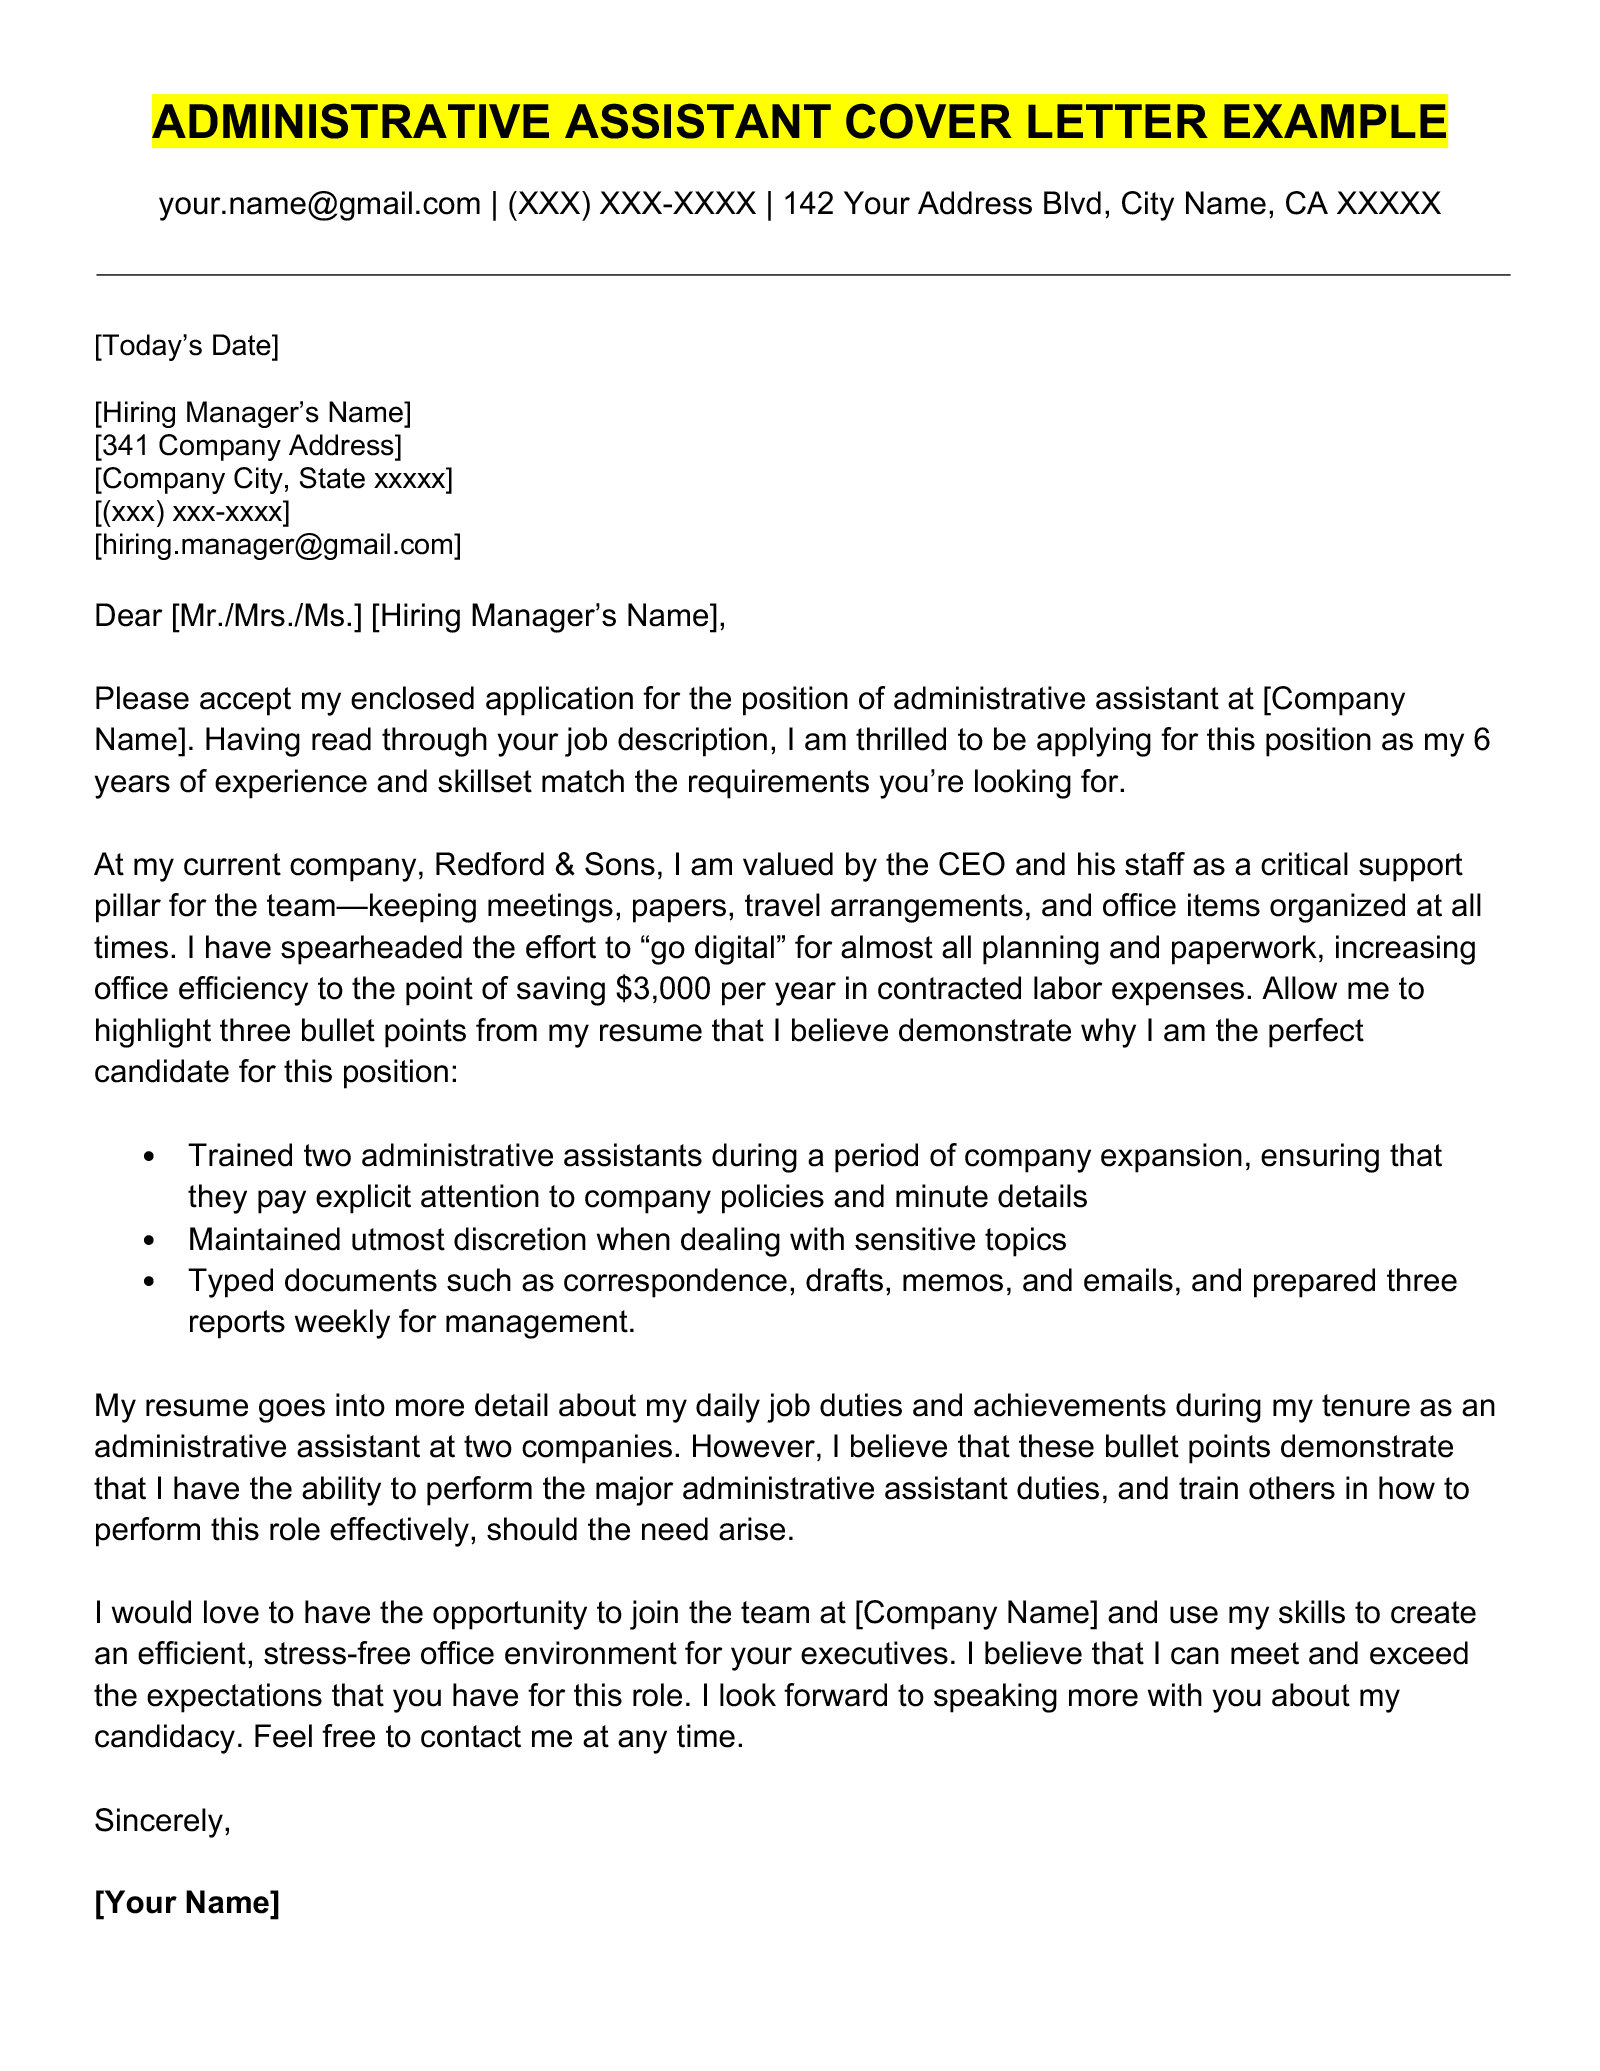 An example of an administrative assistance cover letter